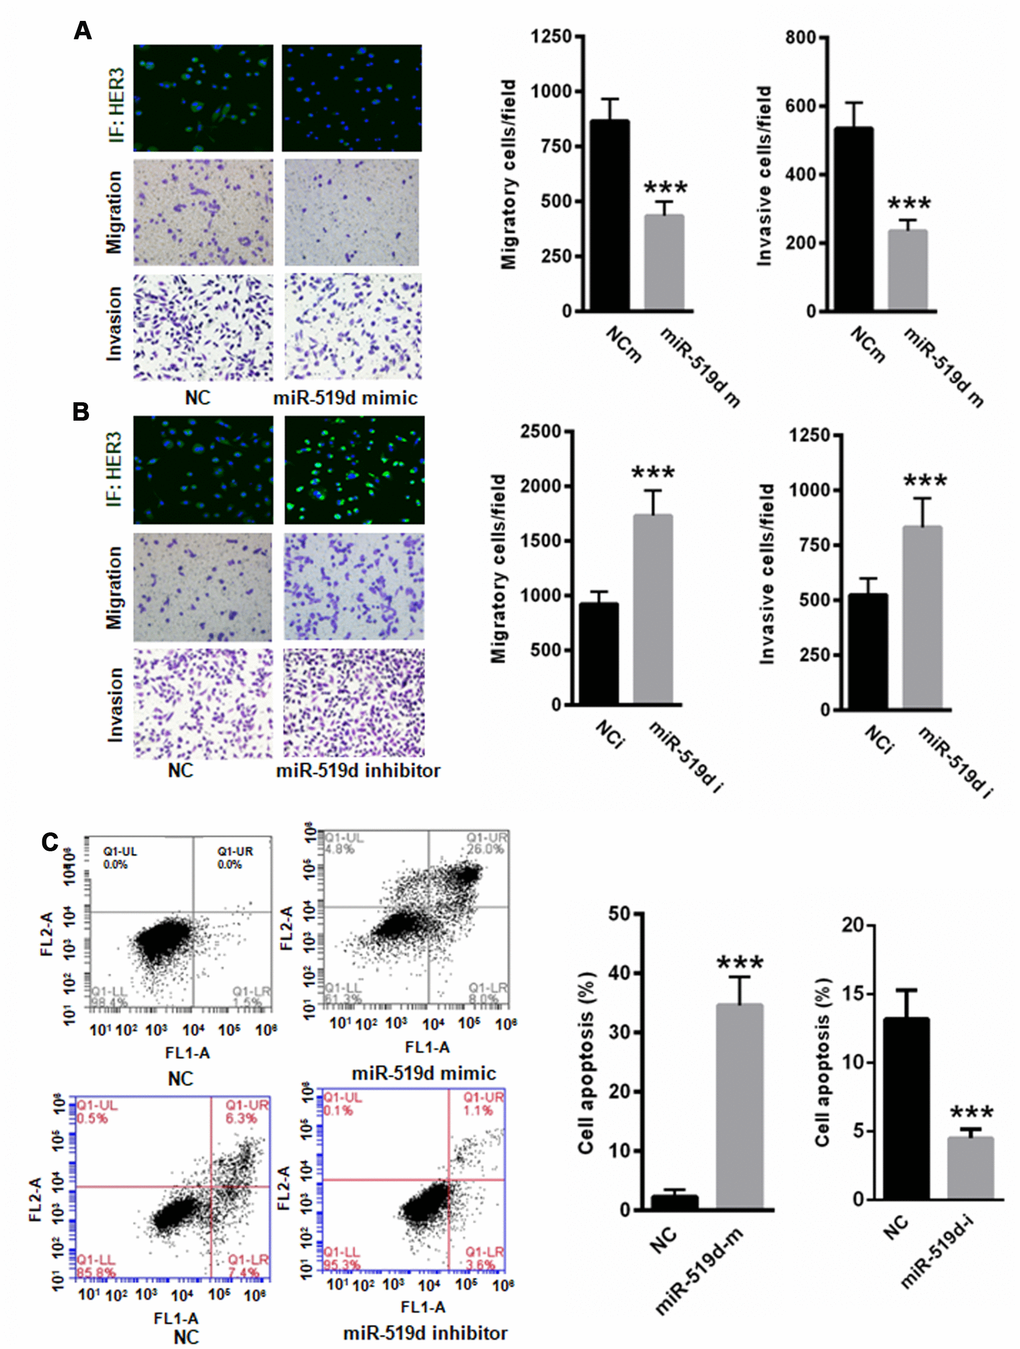 MiR-519d inhibits A549 cell migration and invasion and induces cell apoptosis. (A) Transfection of miR-519d mimic suppressed the expression of HER3 and inhibited A549 cell migration and invasion. (B) Transfection of miR-519d inhibitor increased the expression of HER3 and enhanced A549 cell migration and invasion. (C) Upregulation of miR-519d significantly enhanced A549 cell apoptosis, but suppression of miR-519d significantly reduced A549 cell apoptosis. **p***p